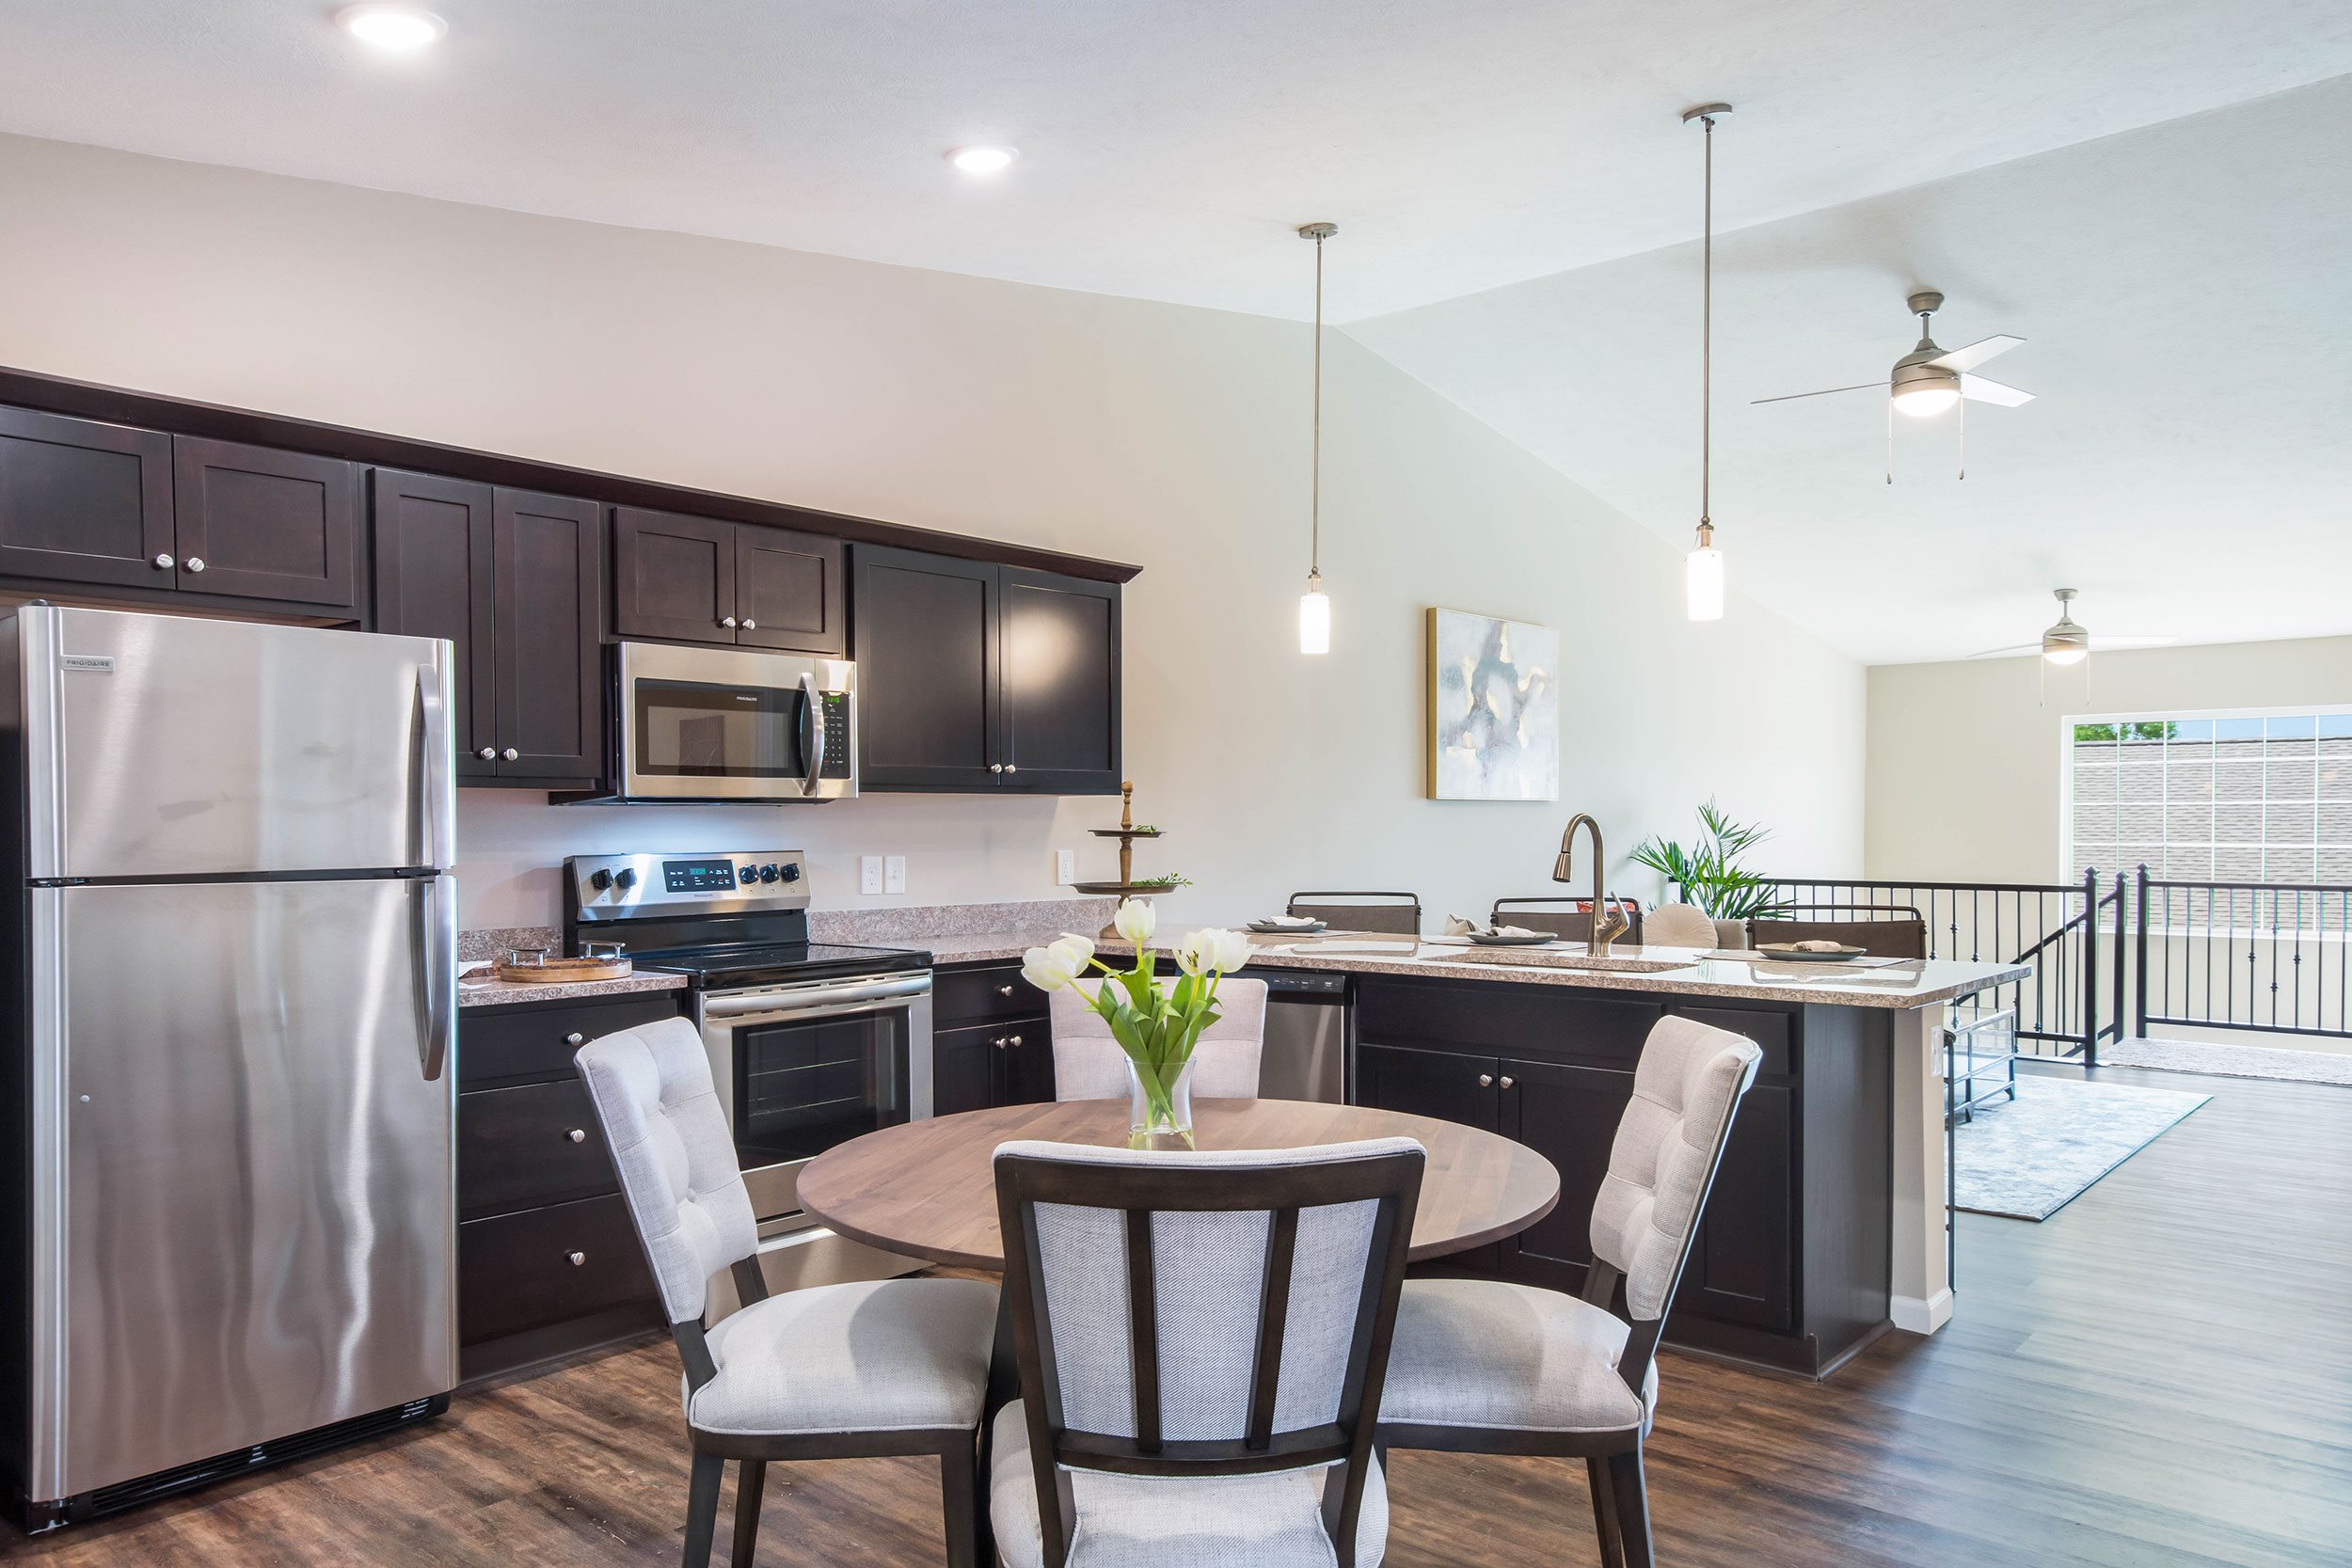 Get the Feel of Home in Our Basswood Floor Plan Kitchen